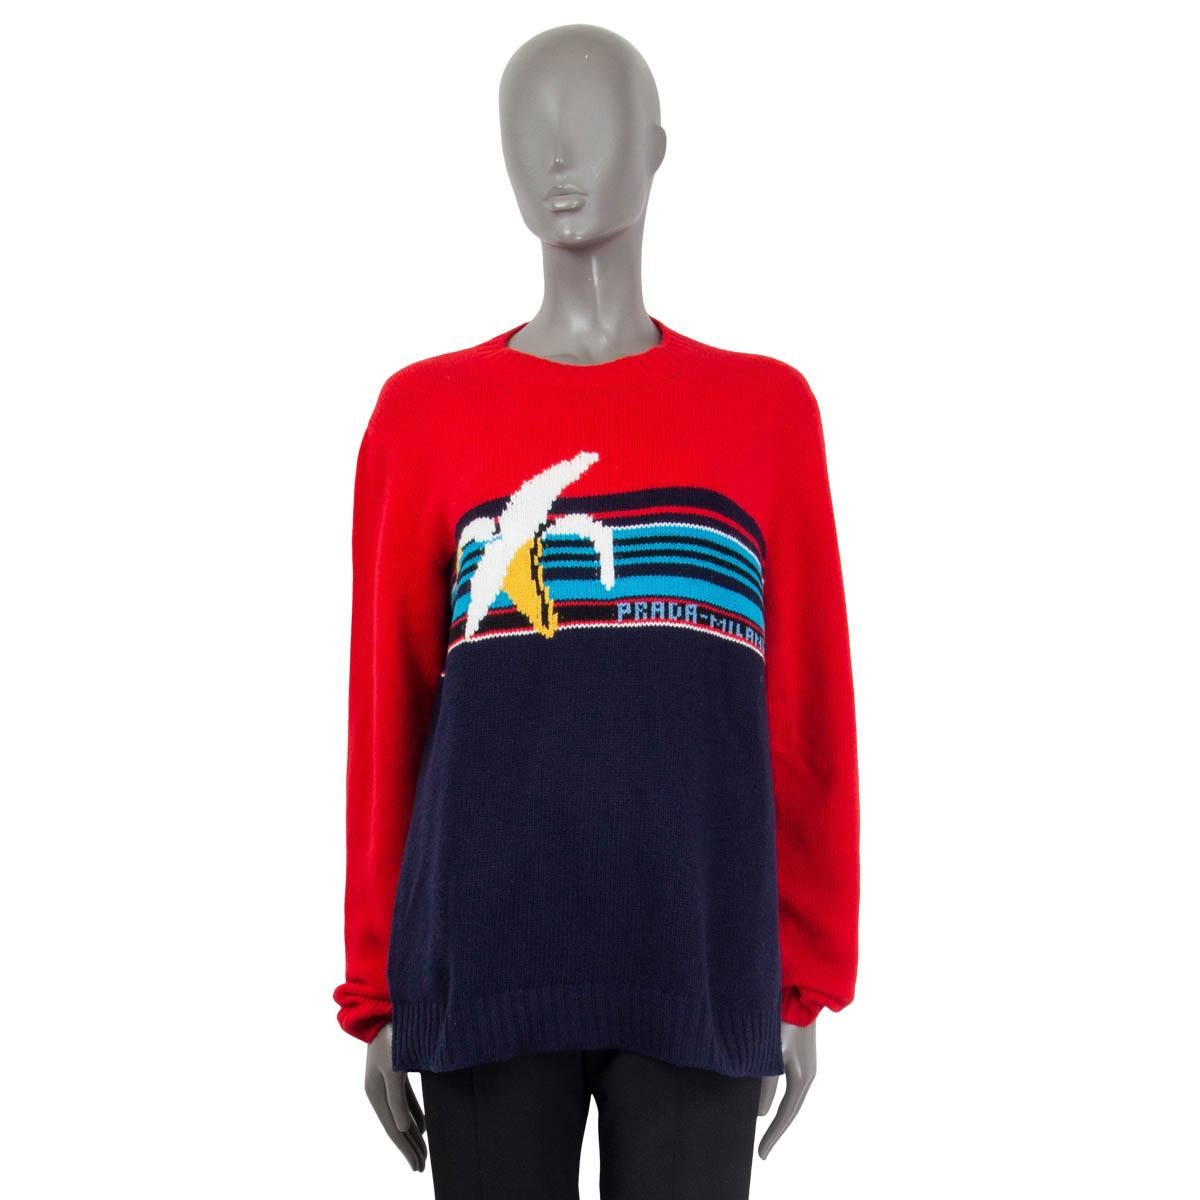 100% authentic Prada oversized striped virgin wool knit sweater in red, navy and turquoise with yellow and off-white banana motif. Has been worn and is in excellent condition. 

Fall/winter 2018 collection.

Measurements
Tag Size	44
Size	L
Shoulder